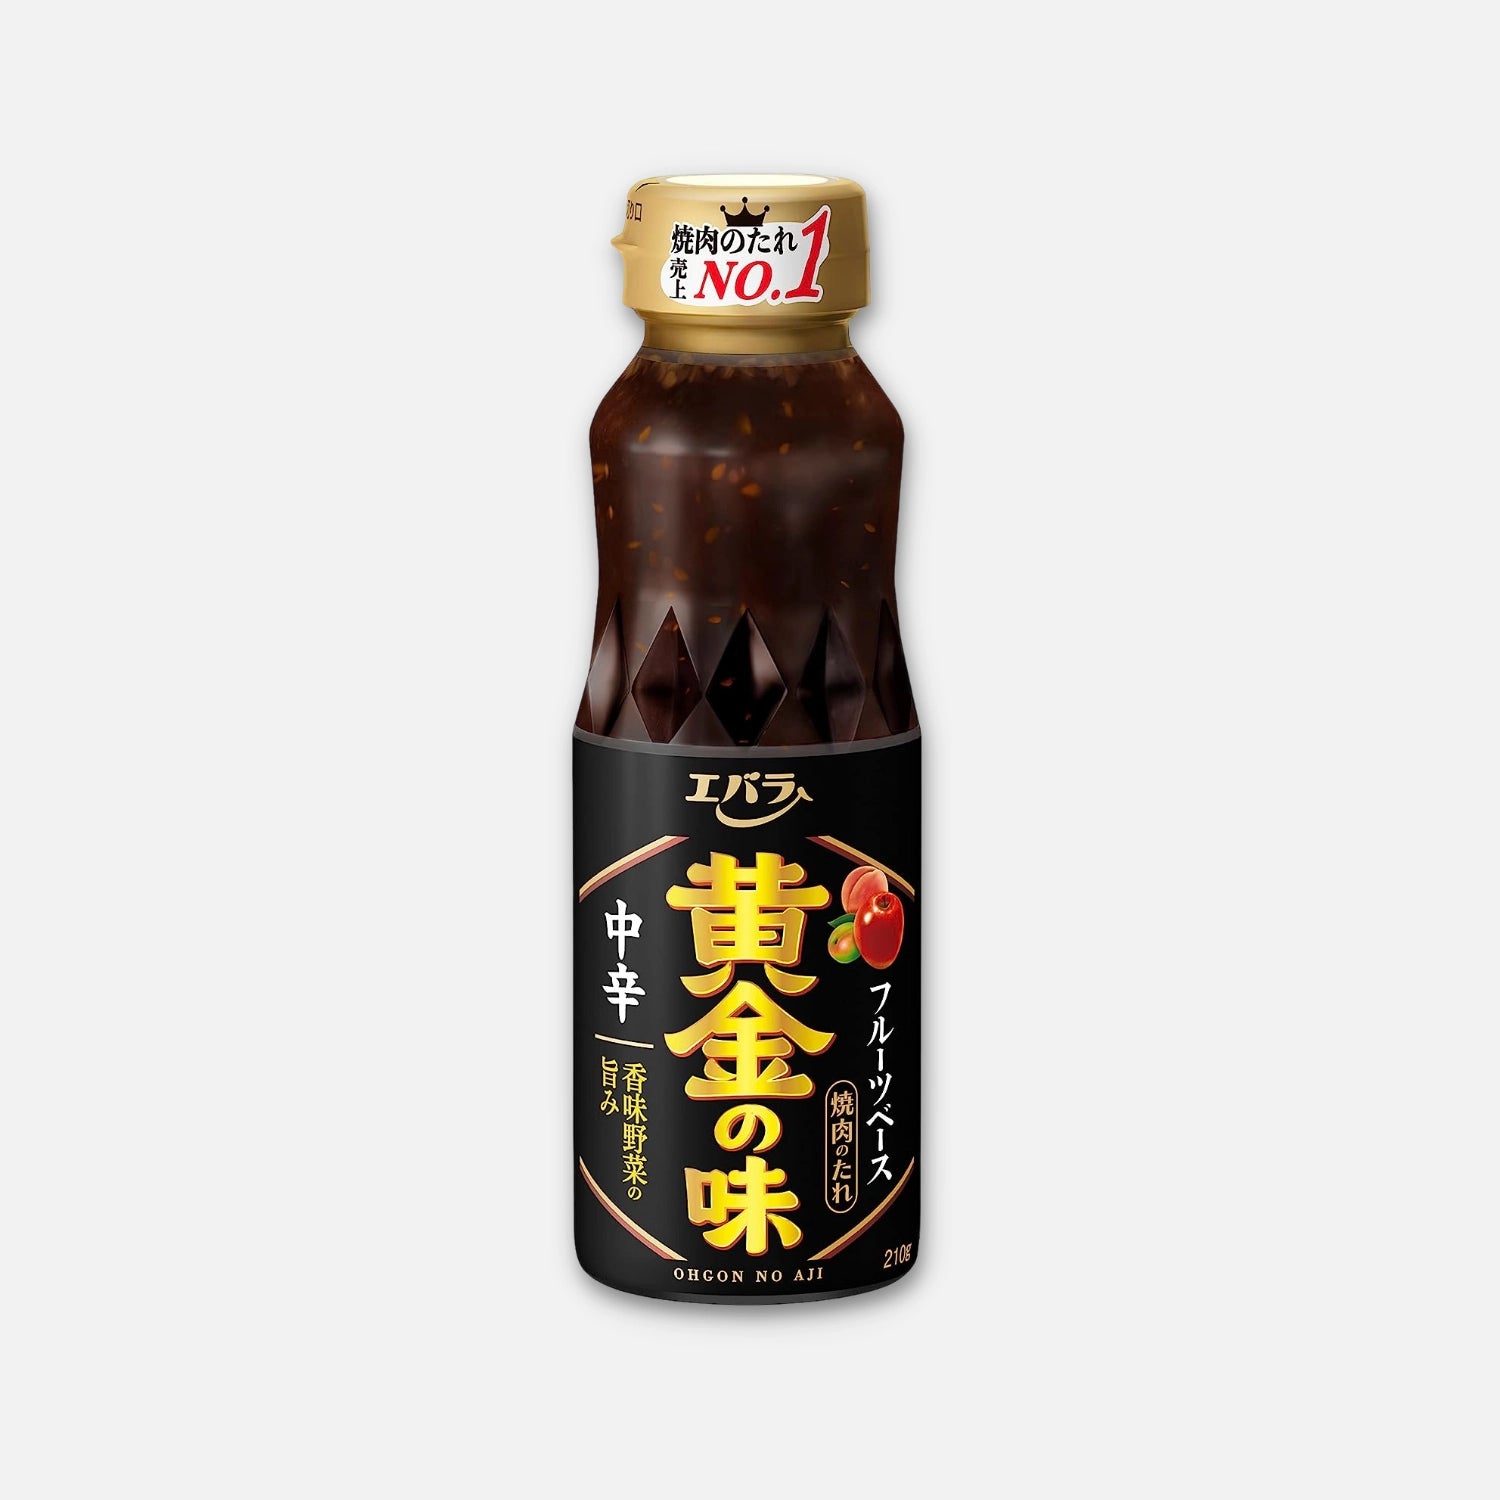 Ebara Spicy Barbecue Sauce With Fruits Base 210g - Buy Me Japan